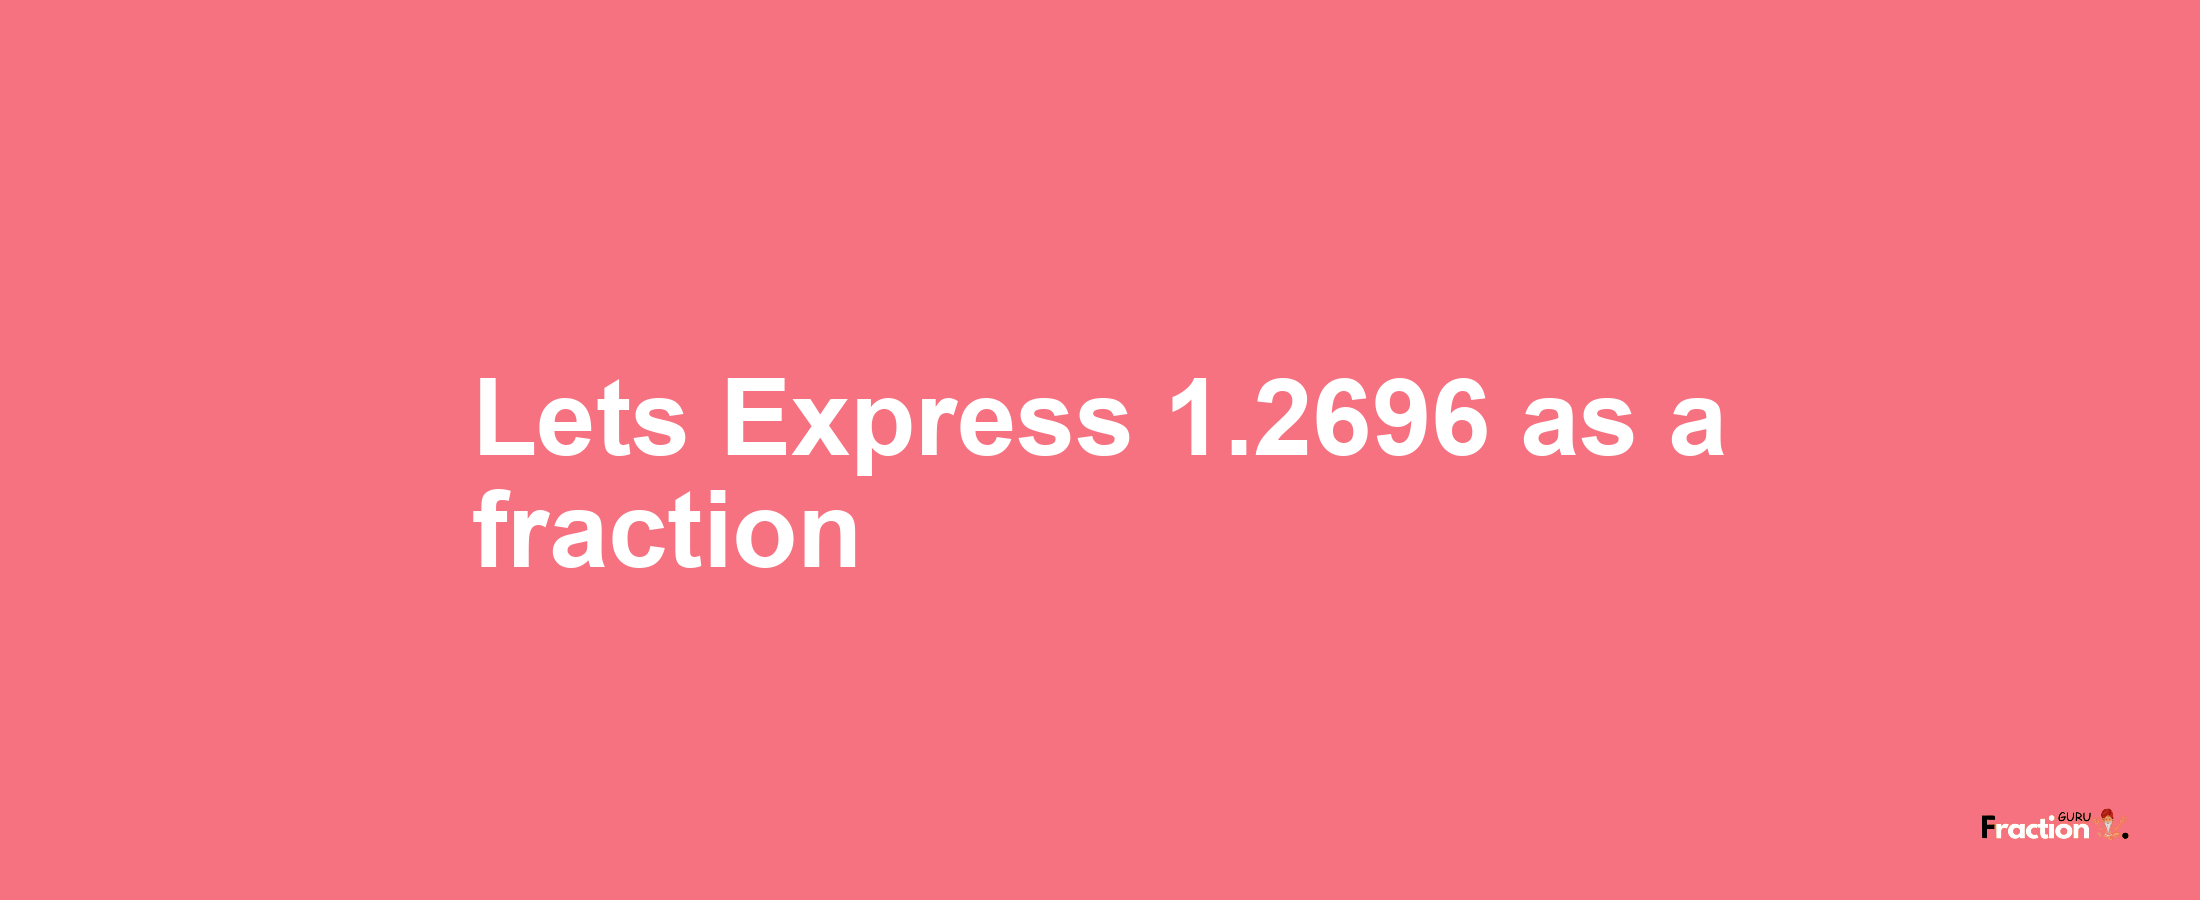 Lets Express 1.2696 as afraction